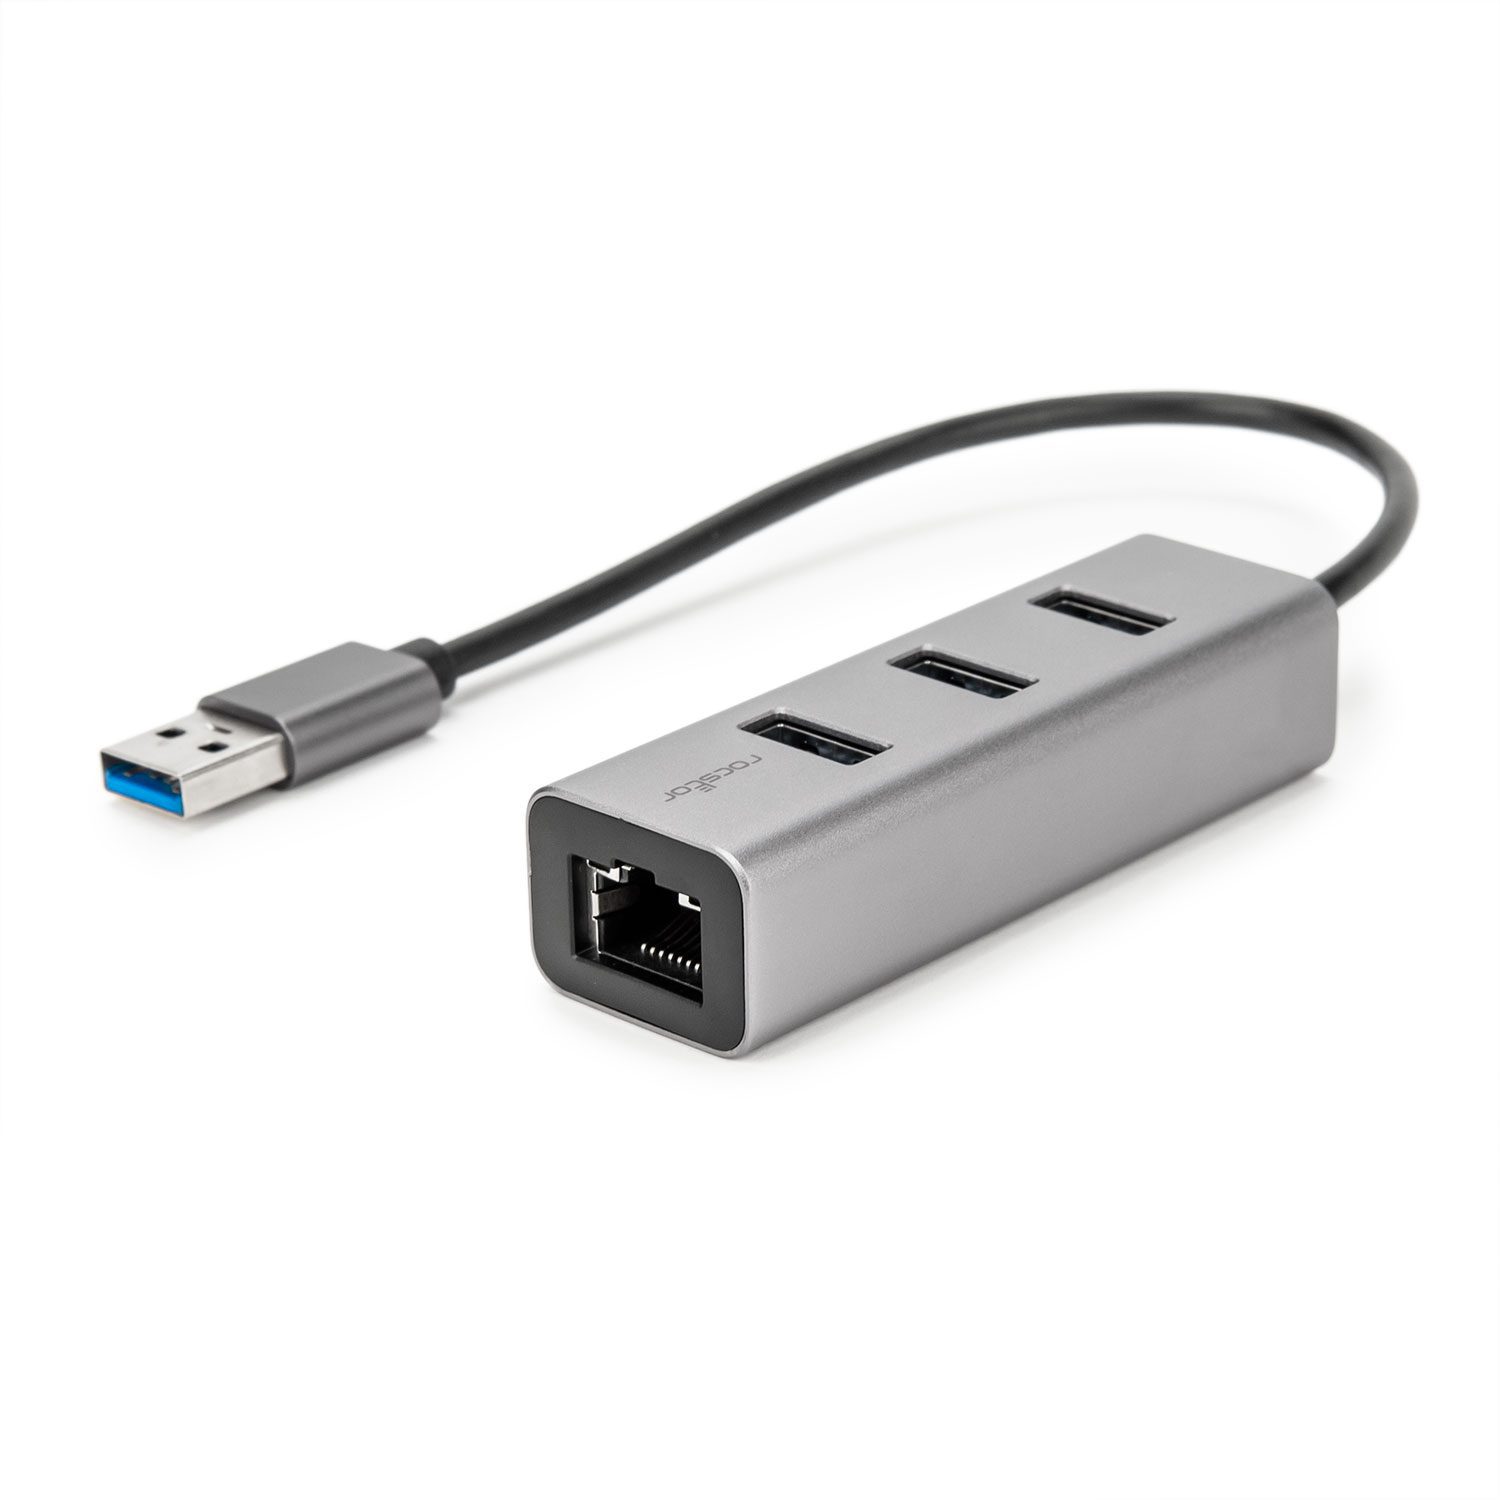 Multiport Adapter USB-A to USB-A (3x) Hub with Gigabit Ethernet